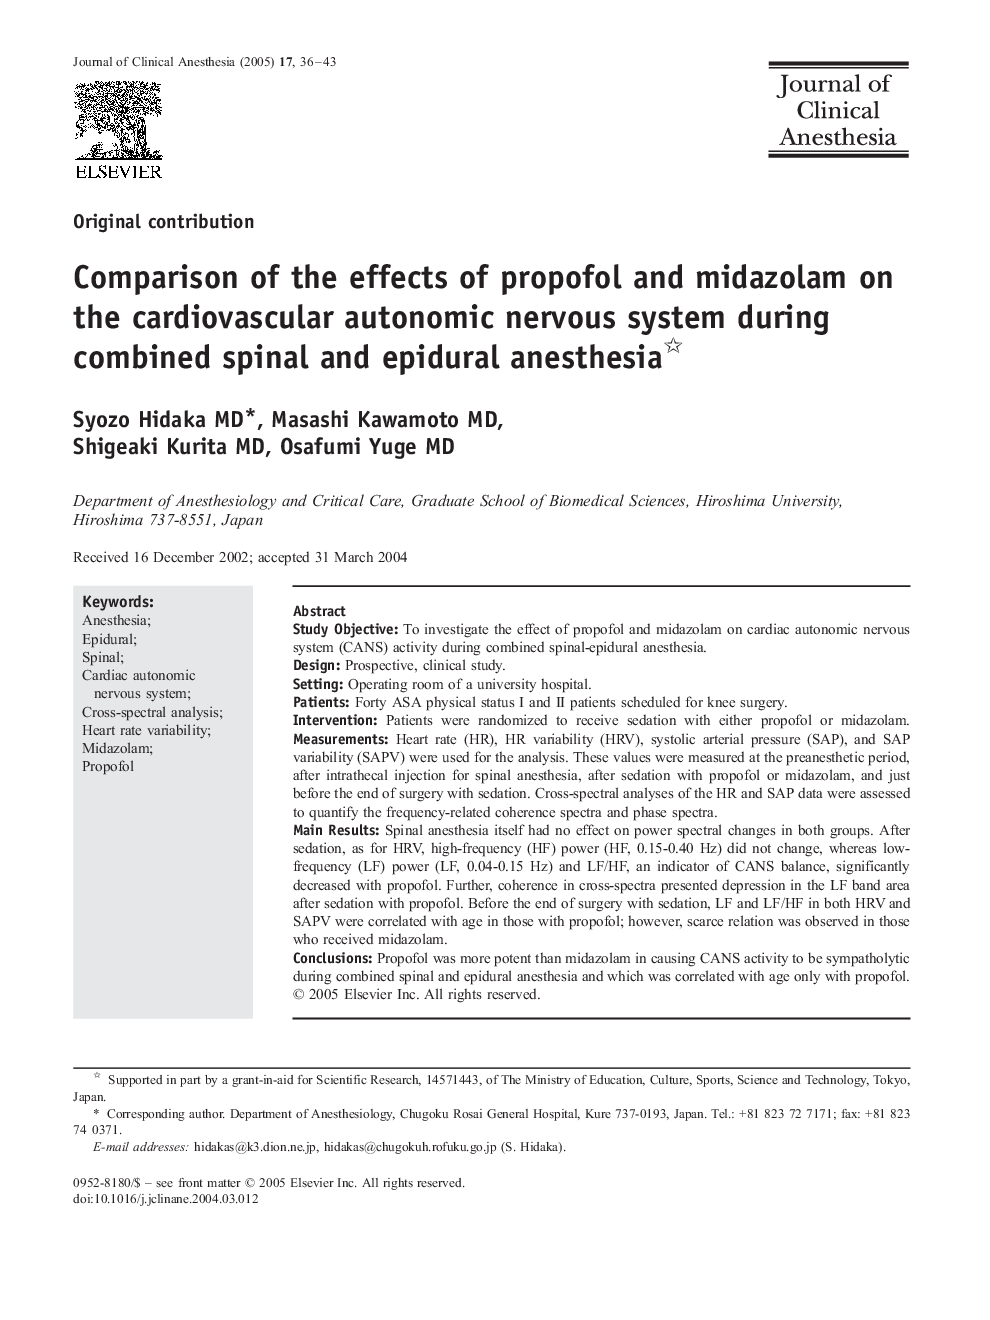 Comparison of the effects of propofol and midazolam on the cardiovascular autonomic nervous system during combined spinal and epidural anesthesia